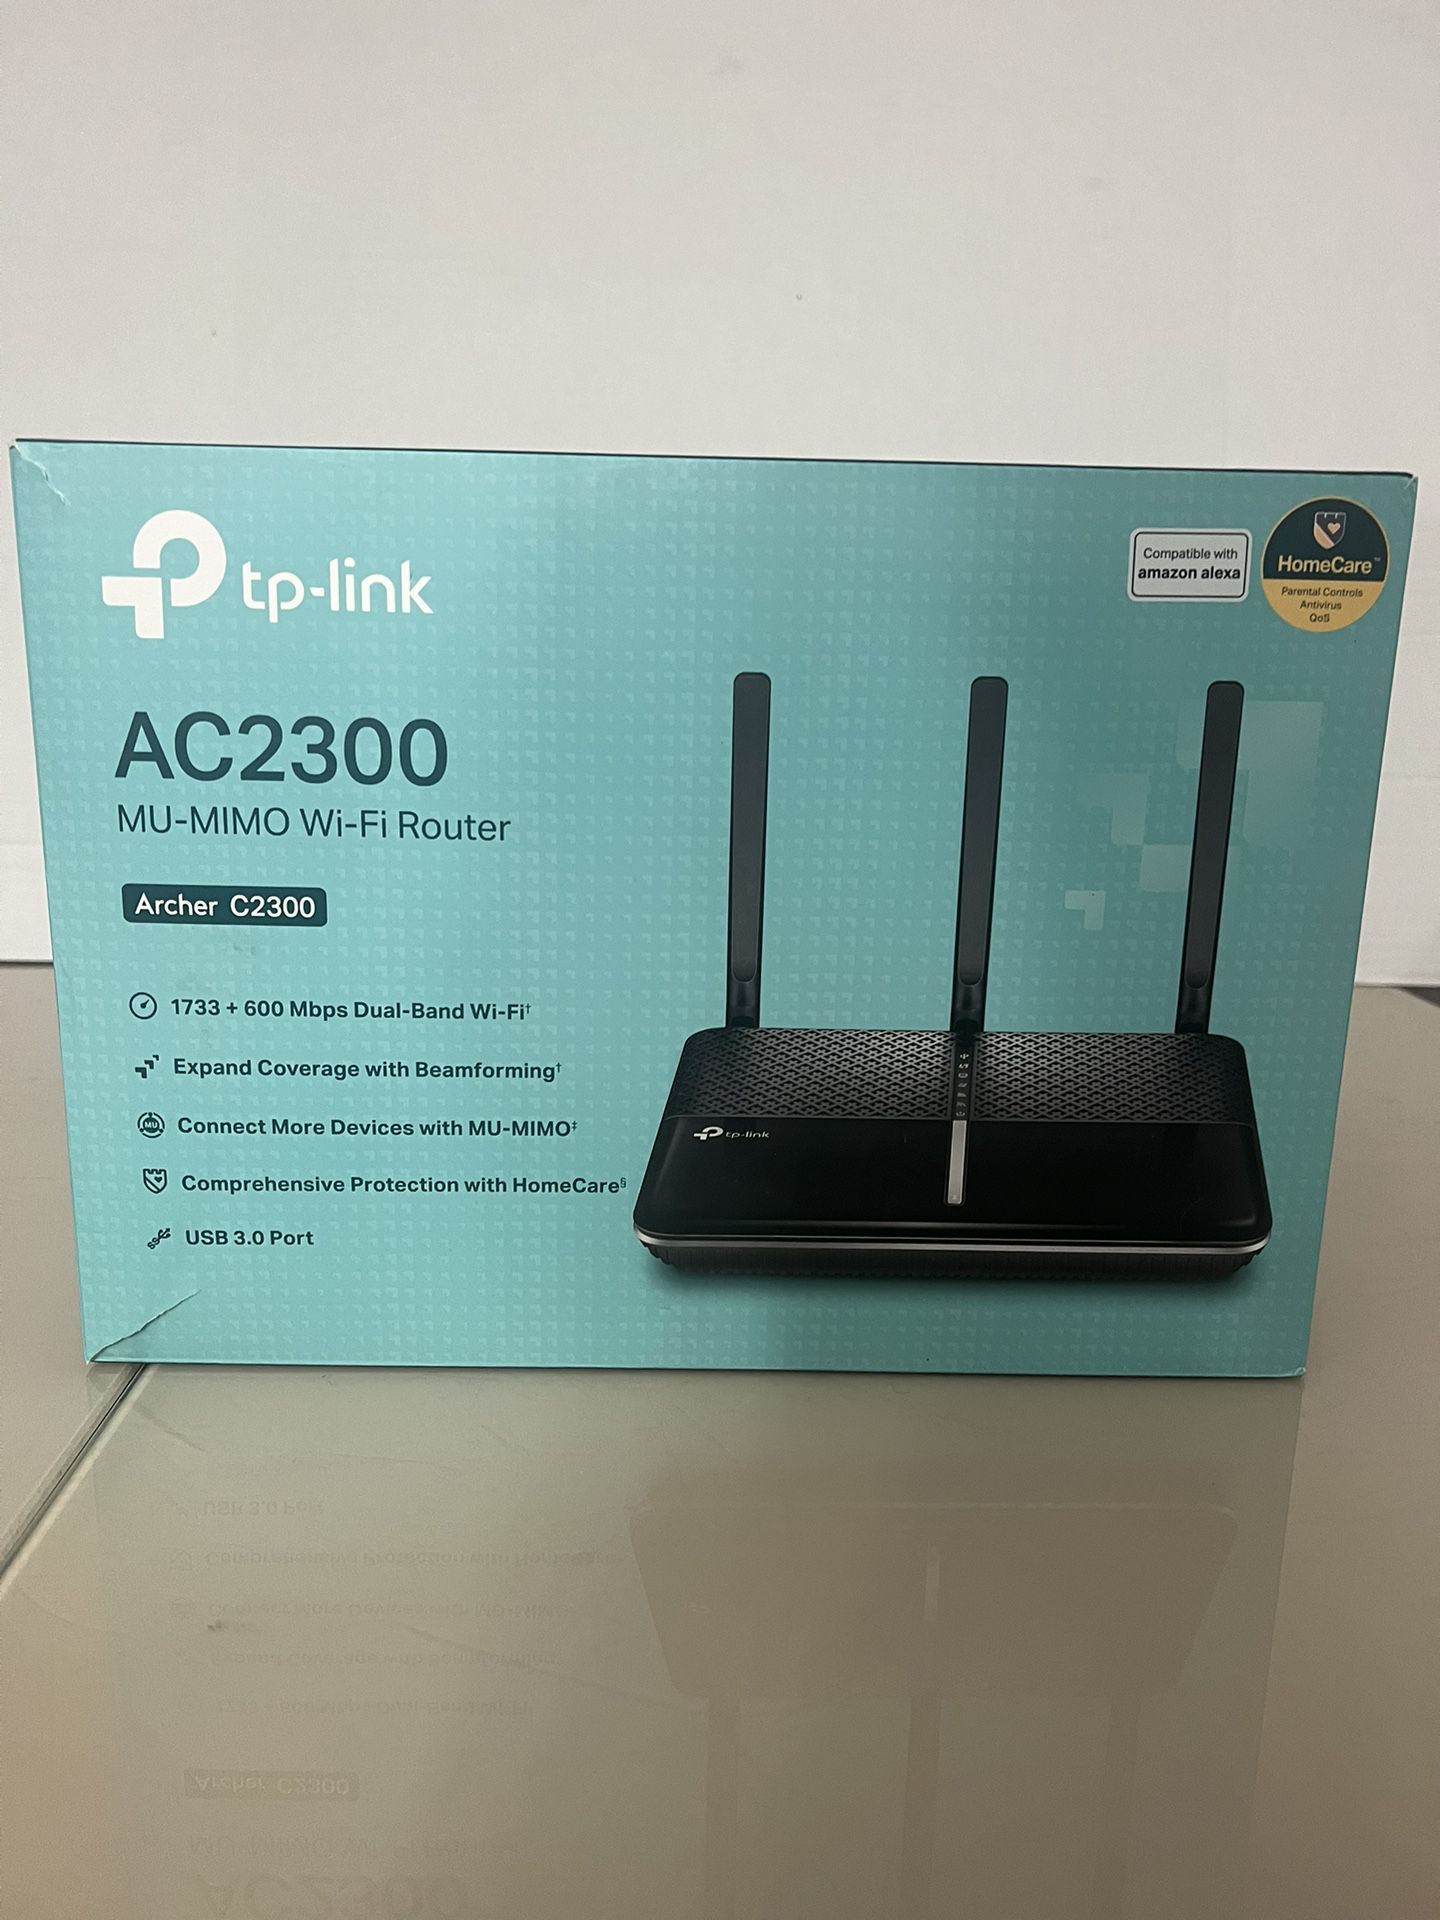 TP-Link C2300 AC2300 600/1625Mbps Wireless Router - Black W/ 3 Ethernet Cables!. Barely used in excellent condition and comes with 3 Ethernet cables n